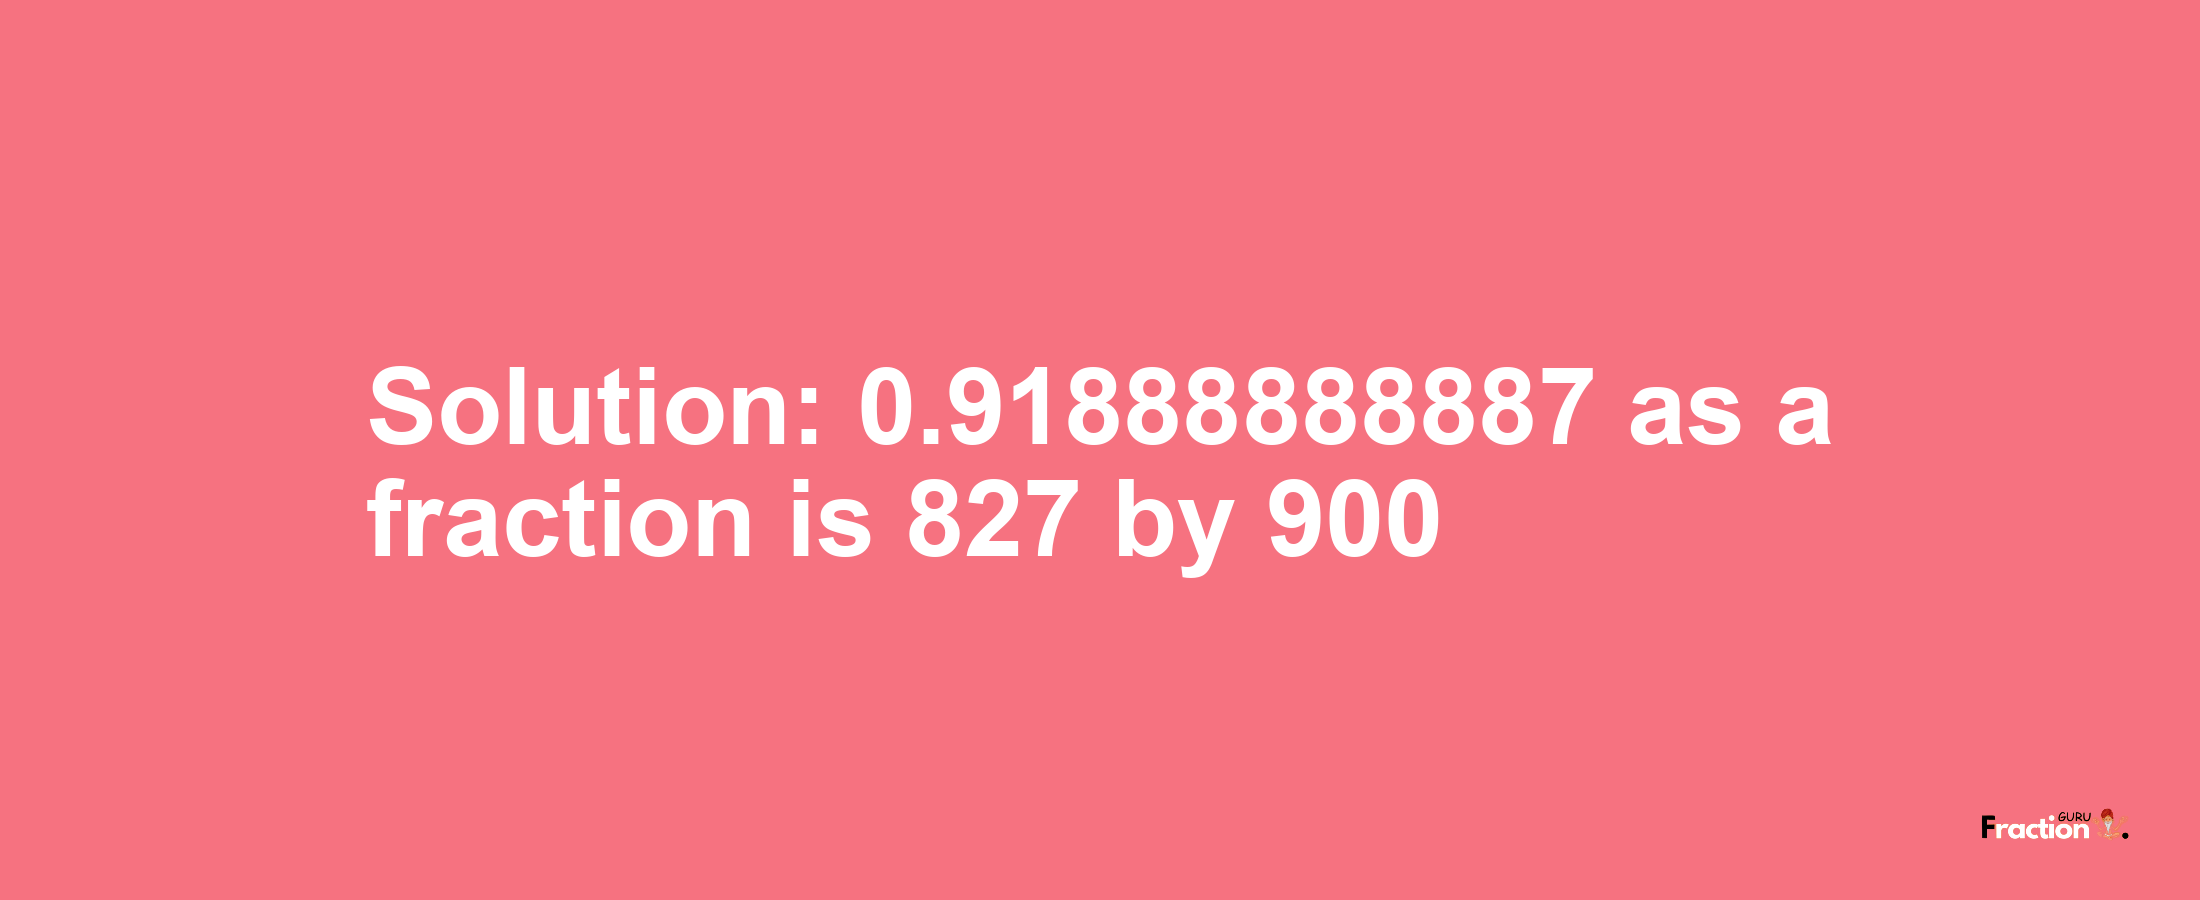 Solution:0.91888888887 as a fraction is 827/900